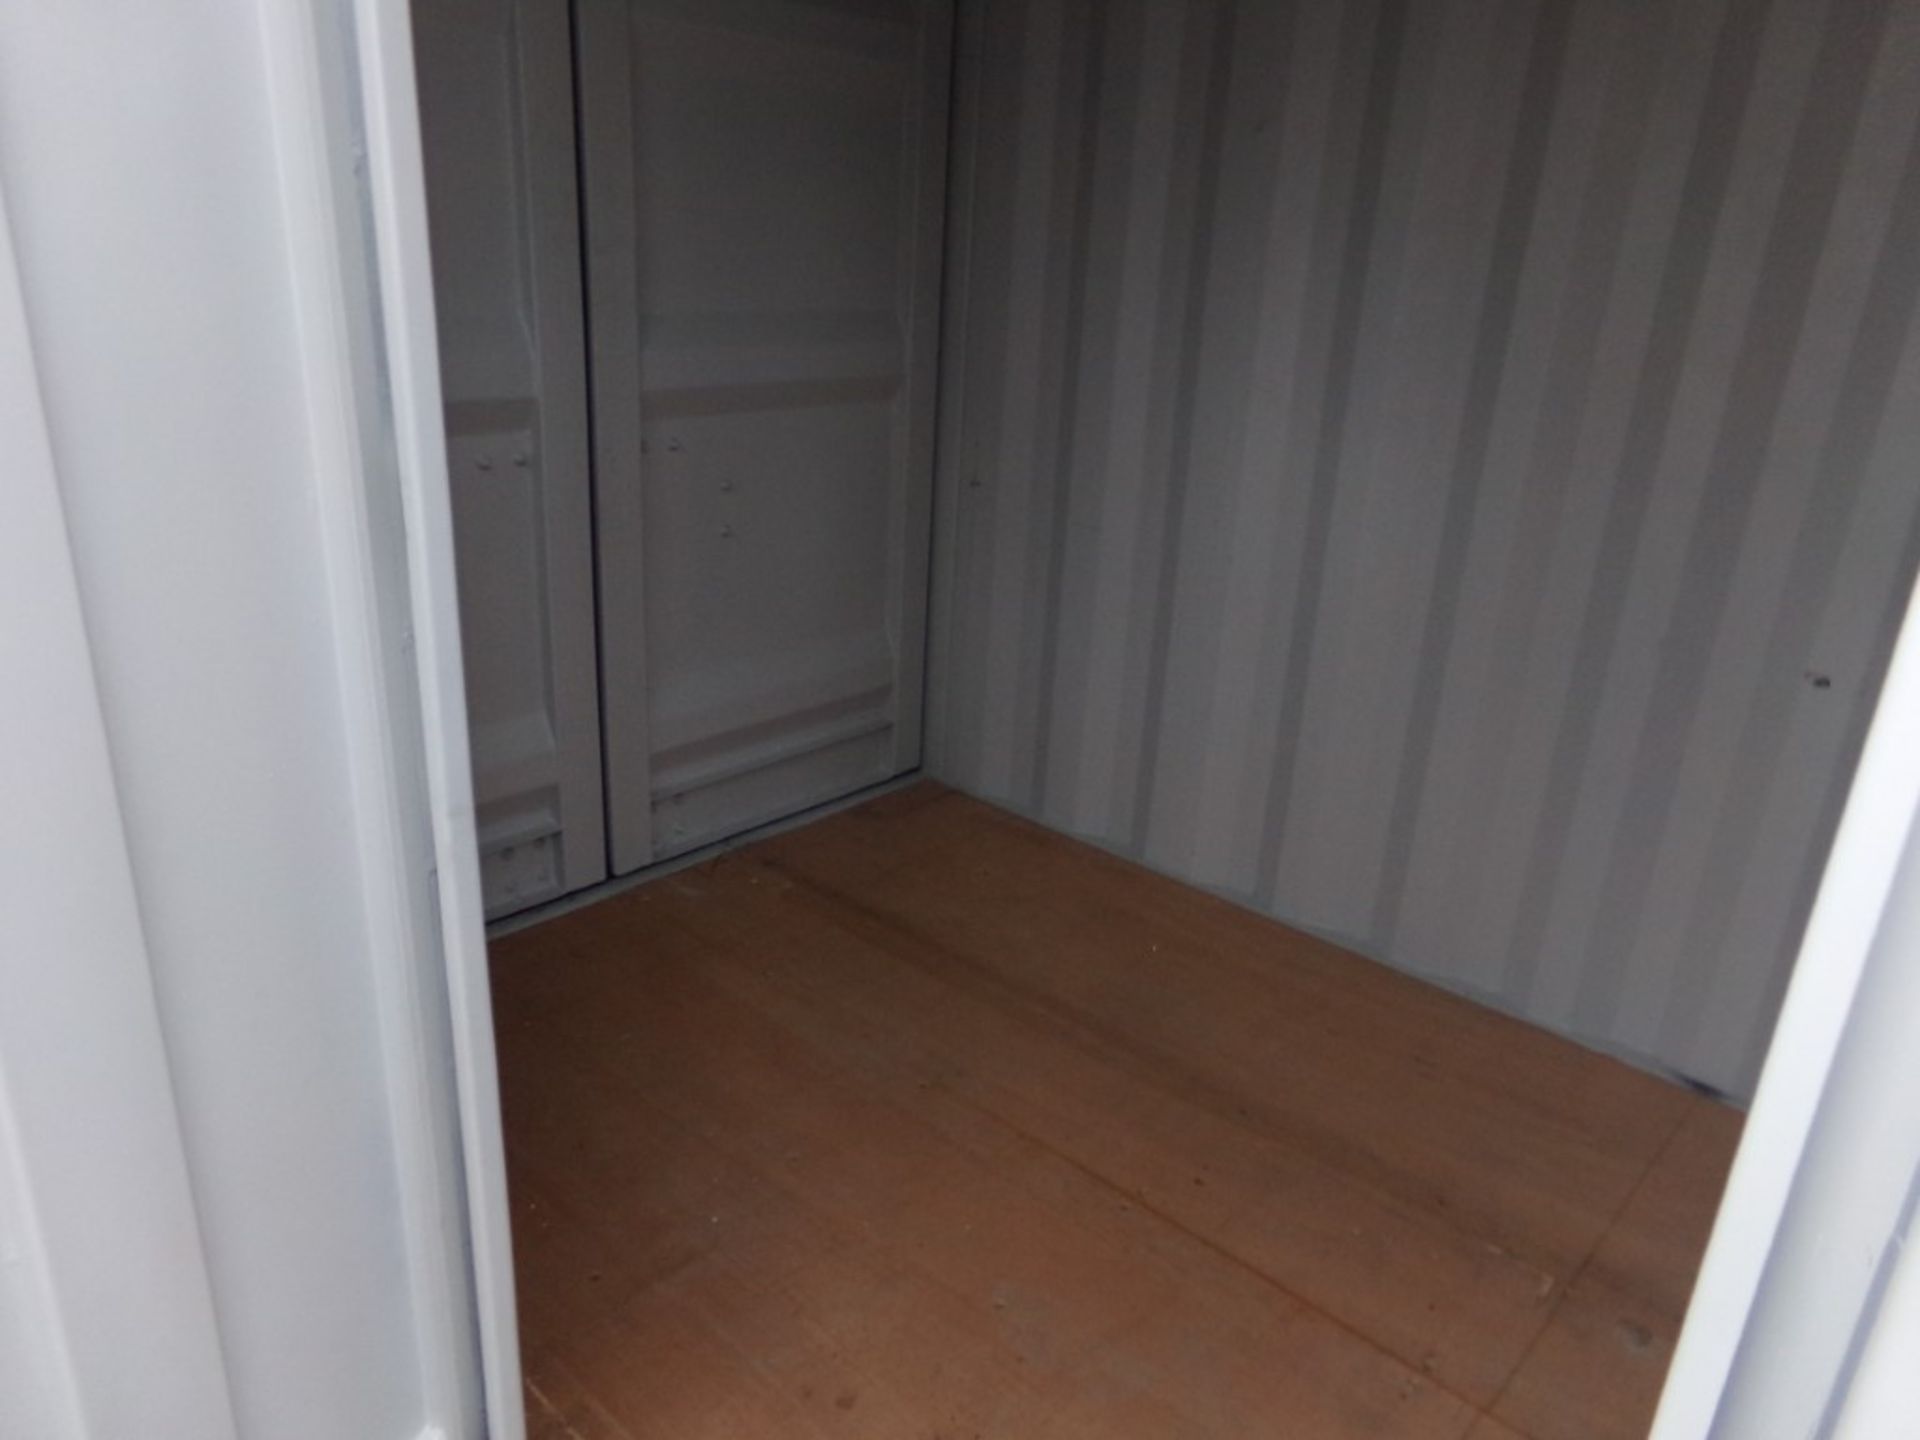 New, 8' x 80'', Lockable Storage Container/Office Builing, Walk-Through Door, Barred Window, Barn - Image 5 of 5